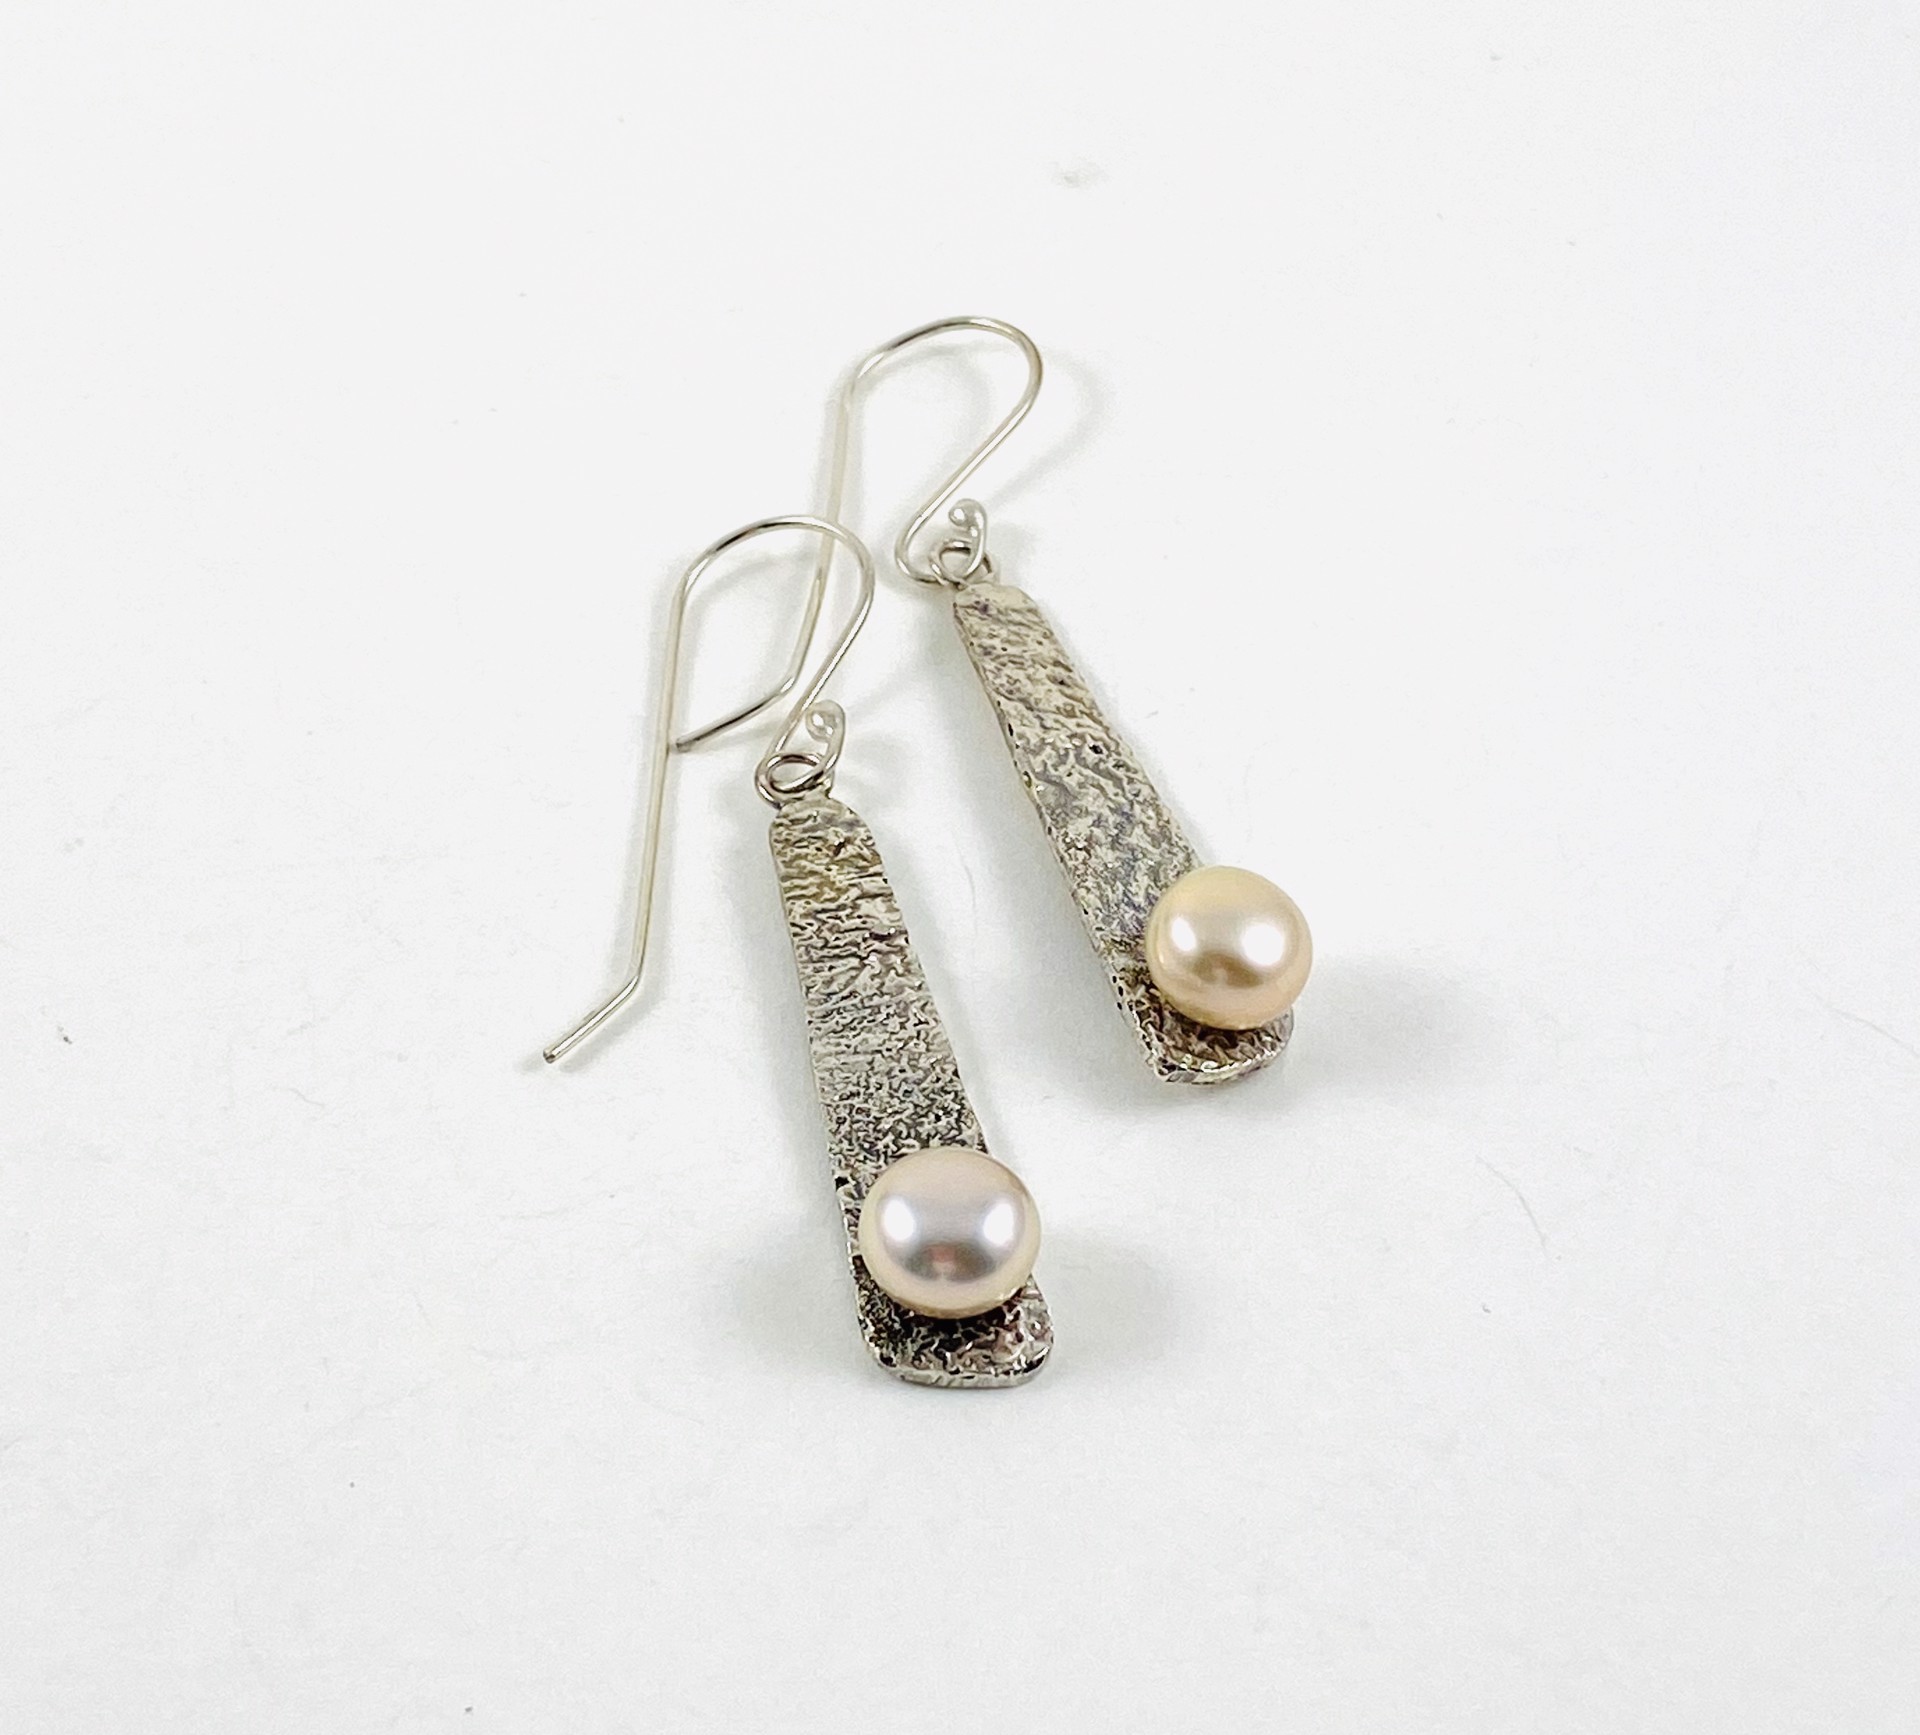 Reticulated Silver, Fresh Water Pearl Earrings #238 by Anne Bivens